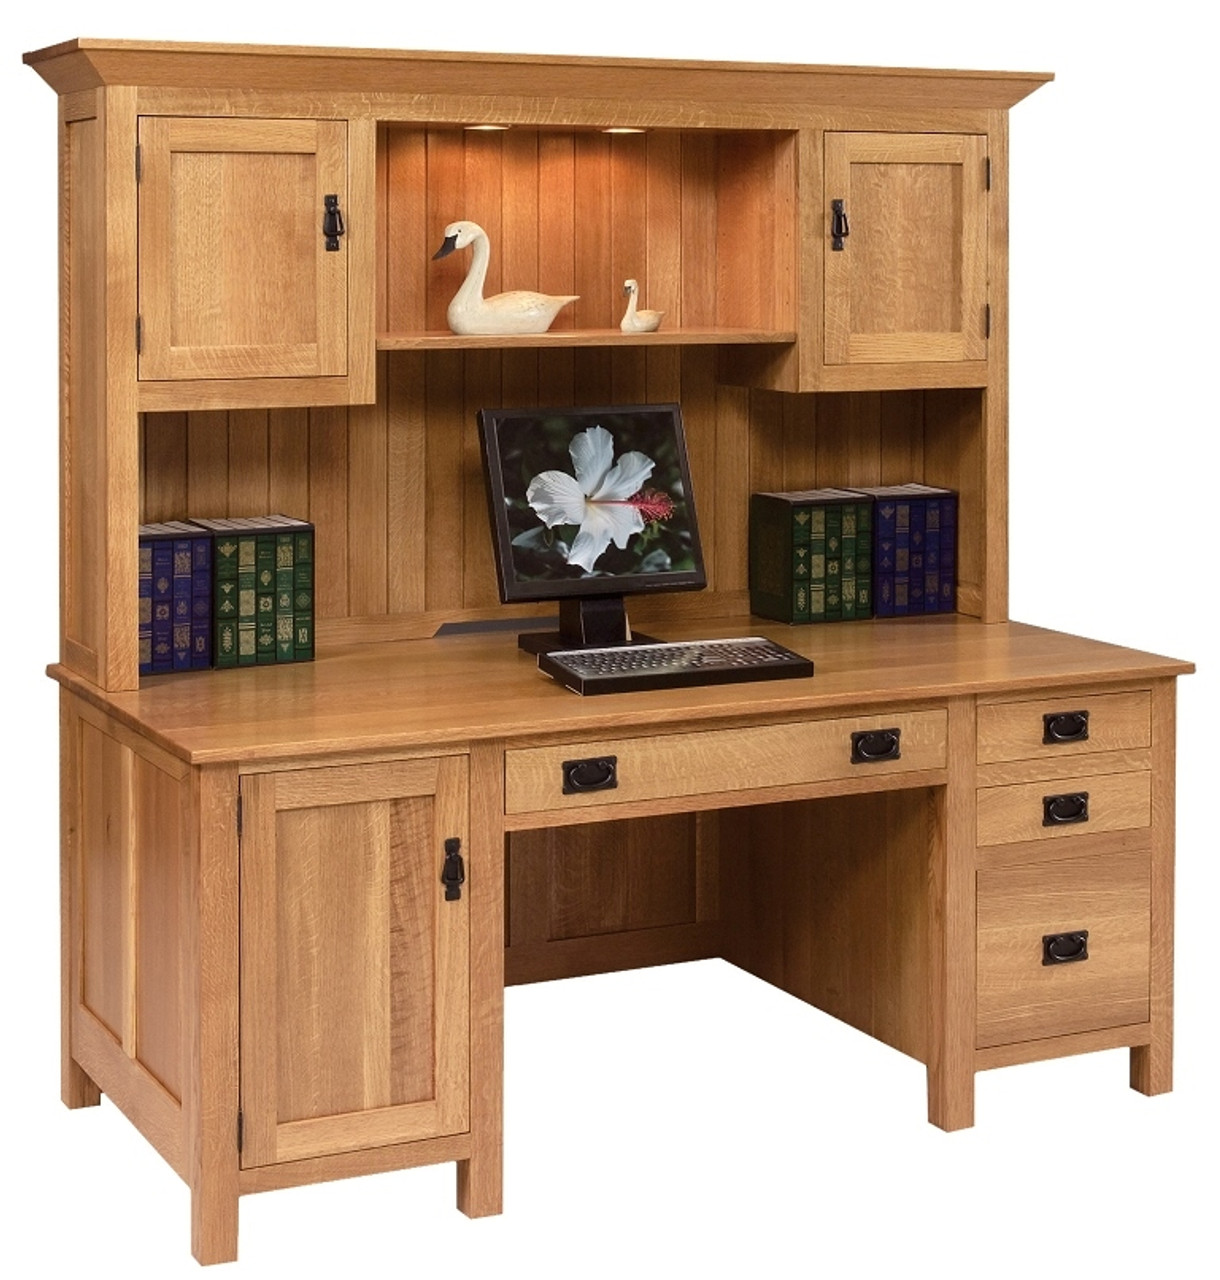 Go 3095 Computer Desk W Hutch Mission Style Whispering Pines